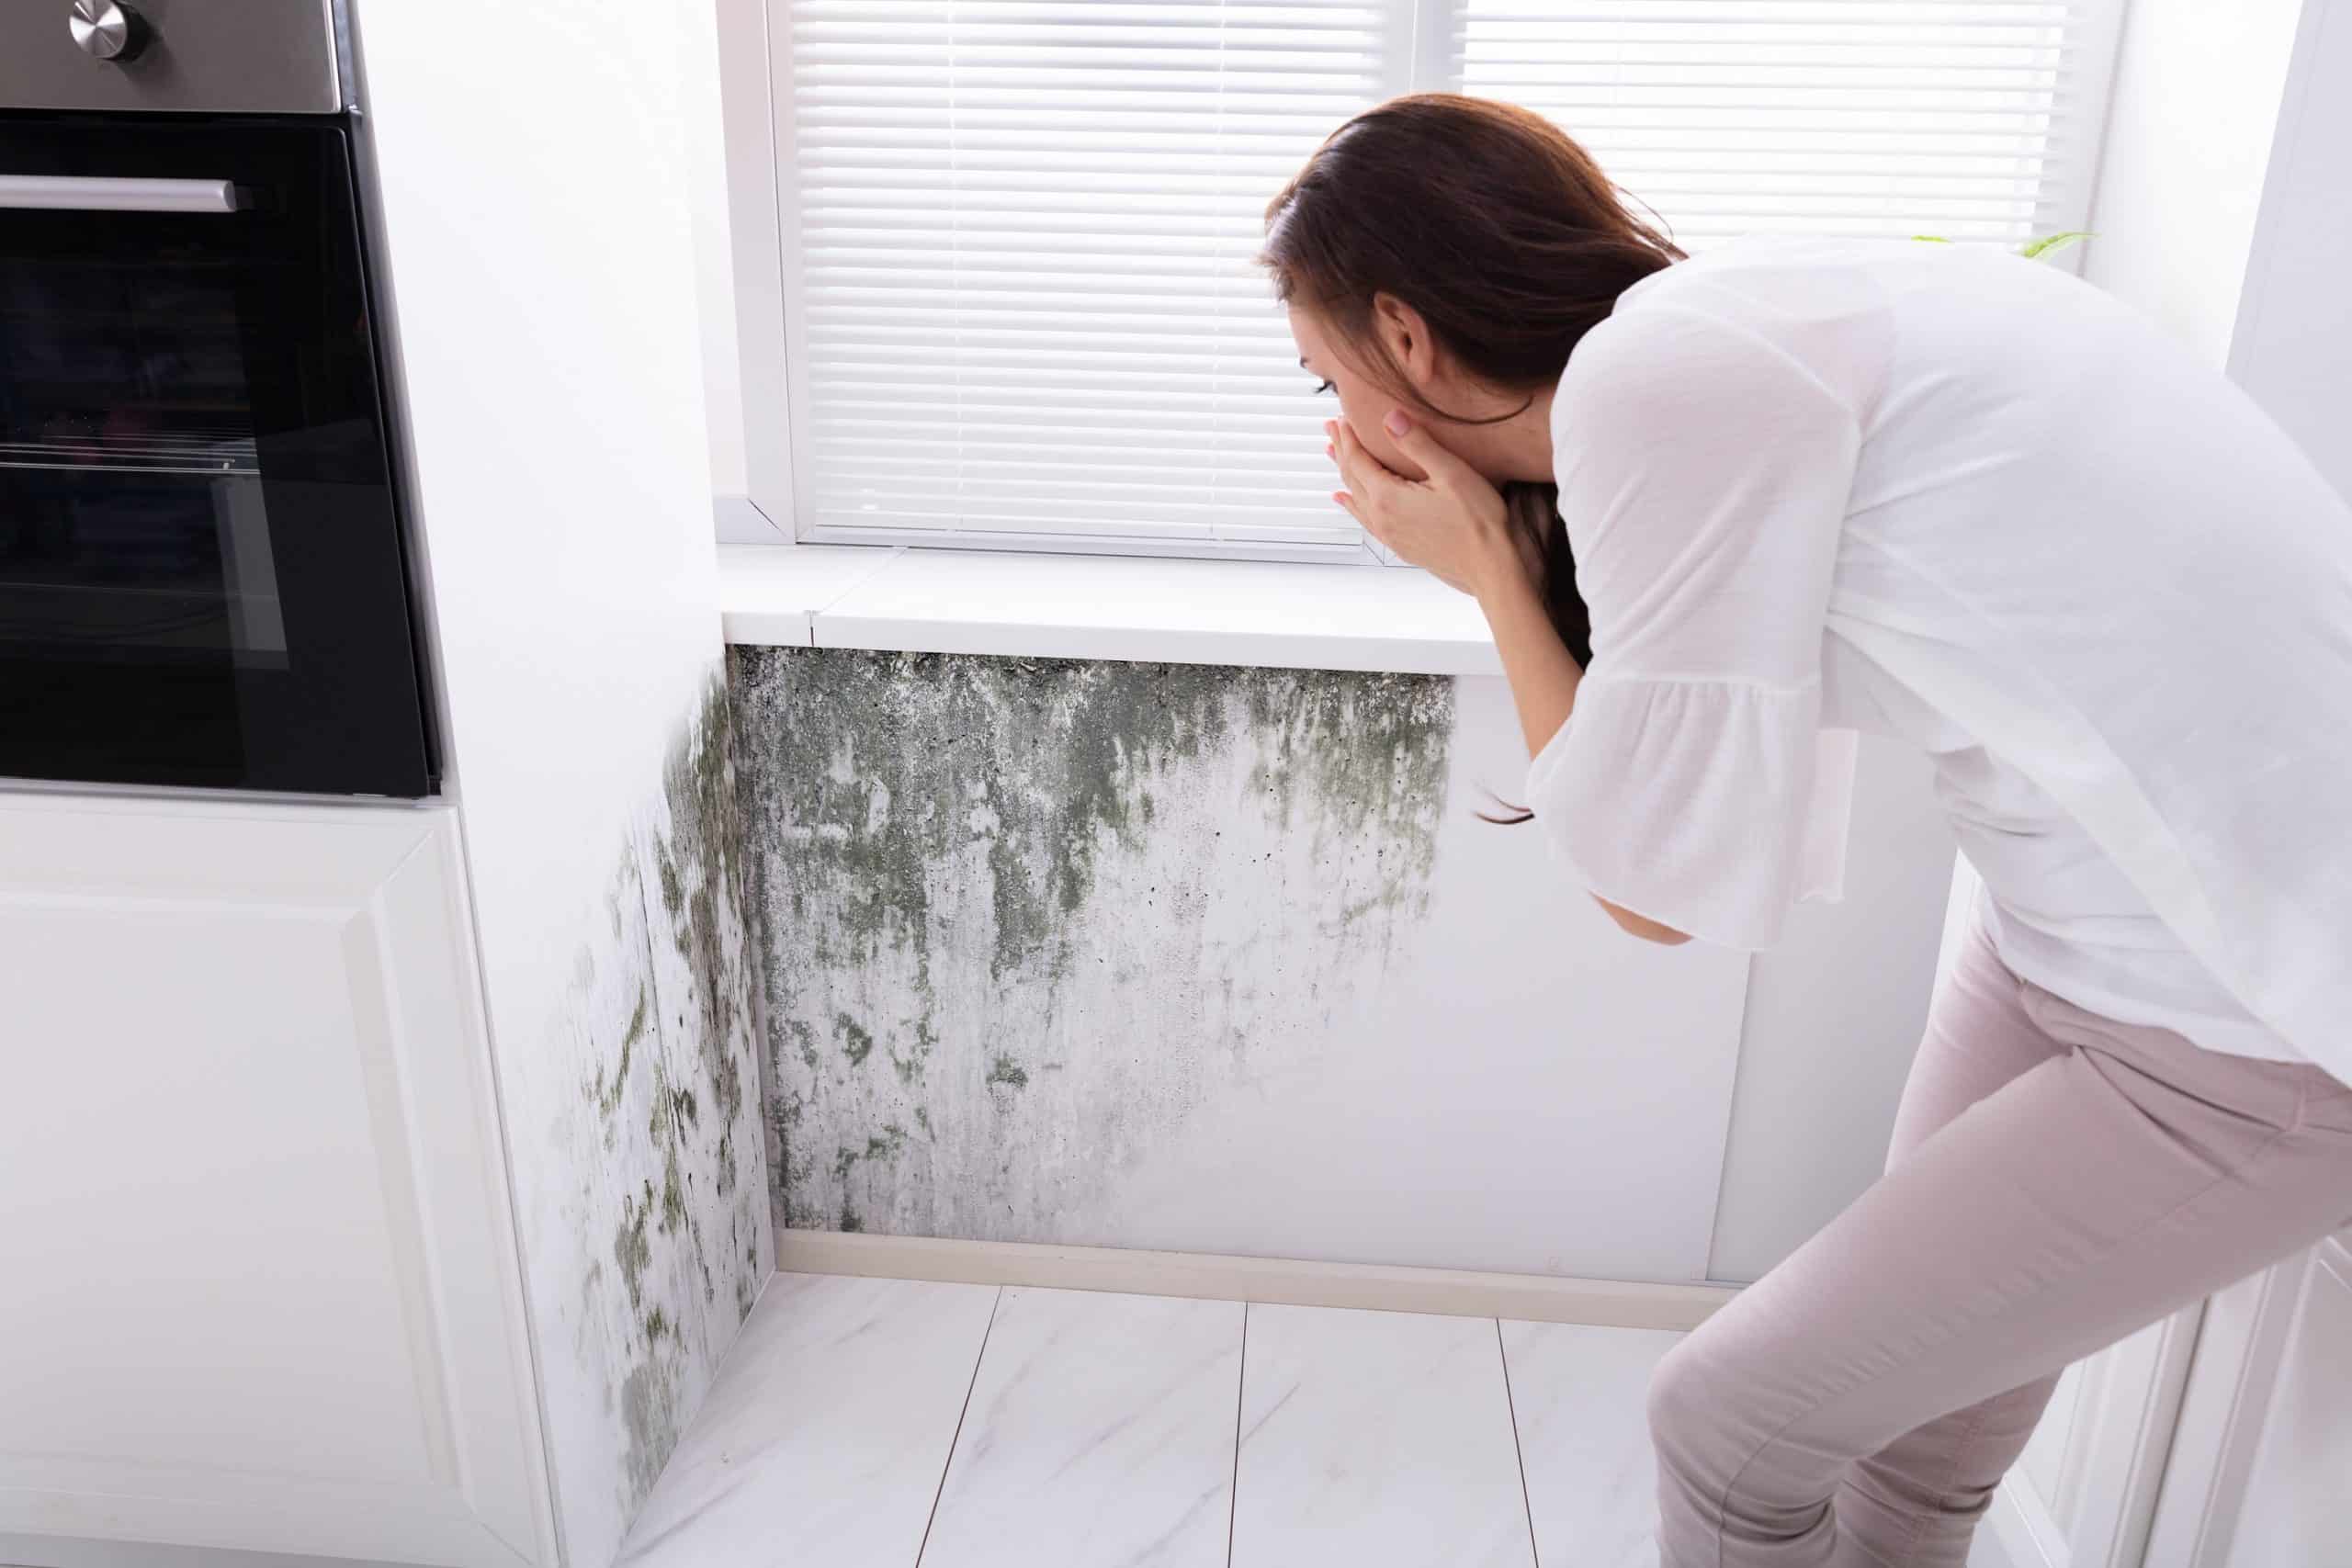 A woman gasps as she sees mold under a window sill in her kitchen.